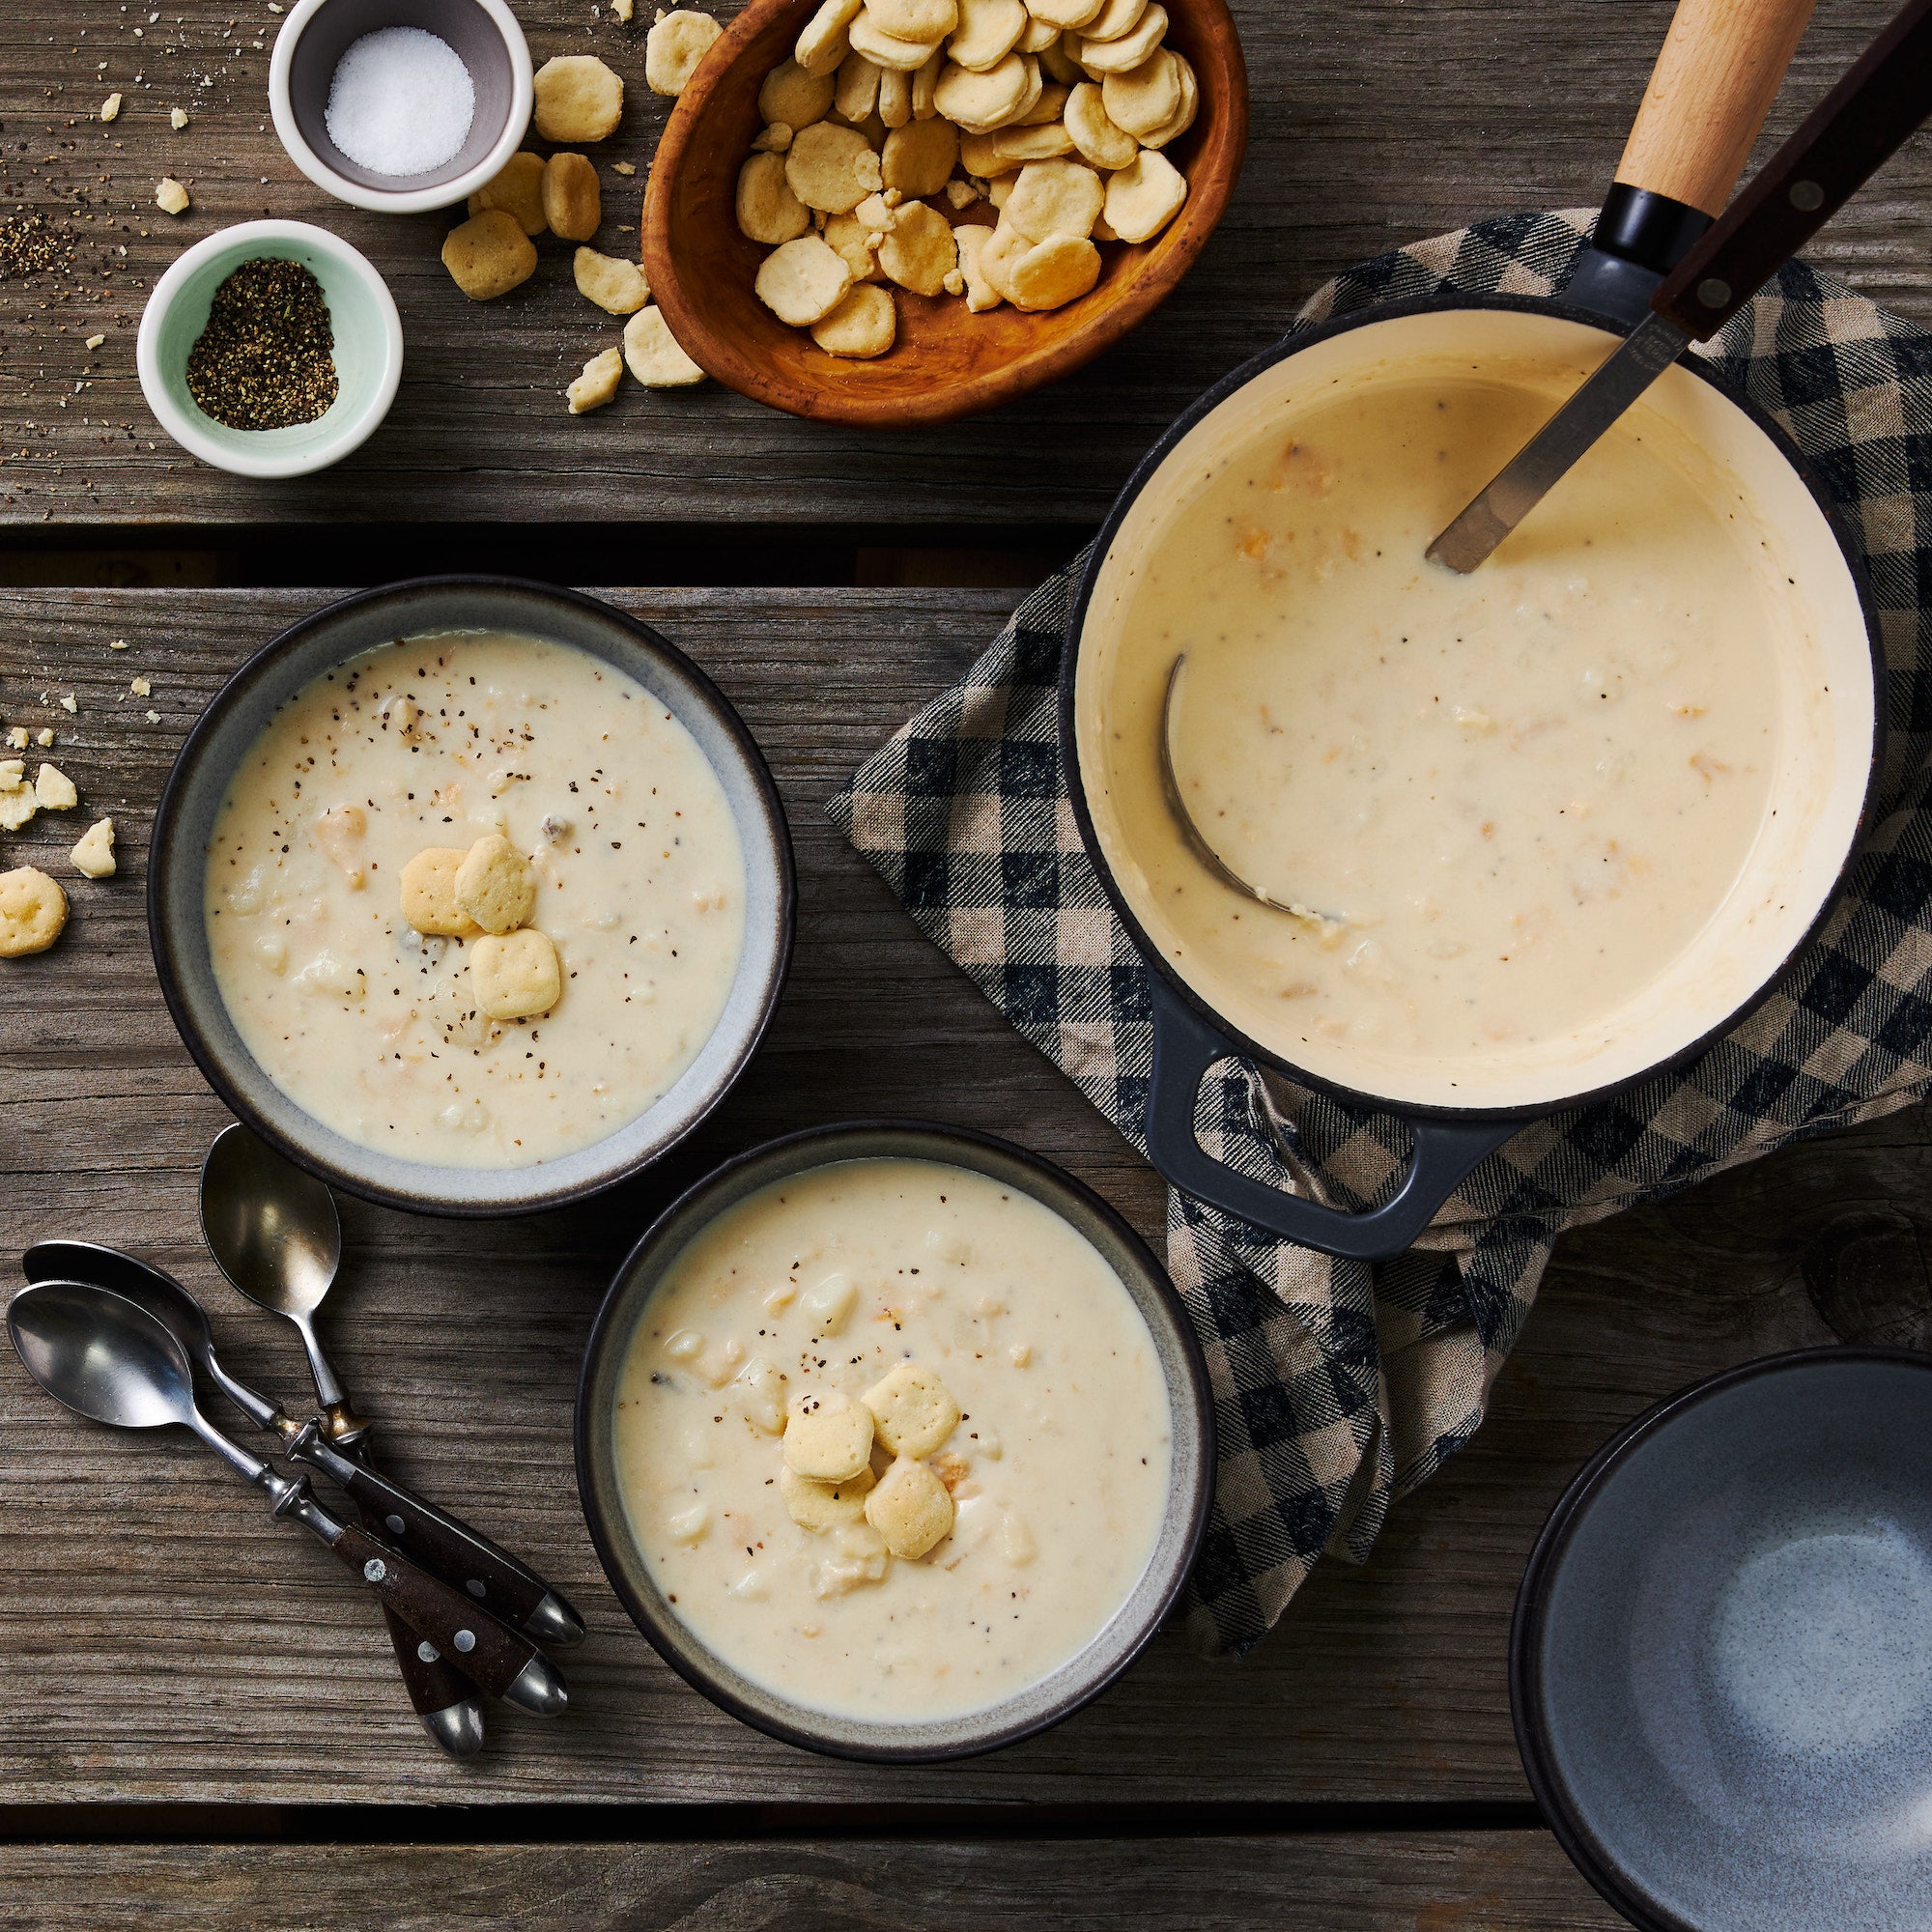 This image shows a large pot of New England Clam Chowder, accompanied by two full bowls seasoned with cracked pepper and topped with oyster crackers.